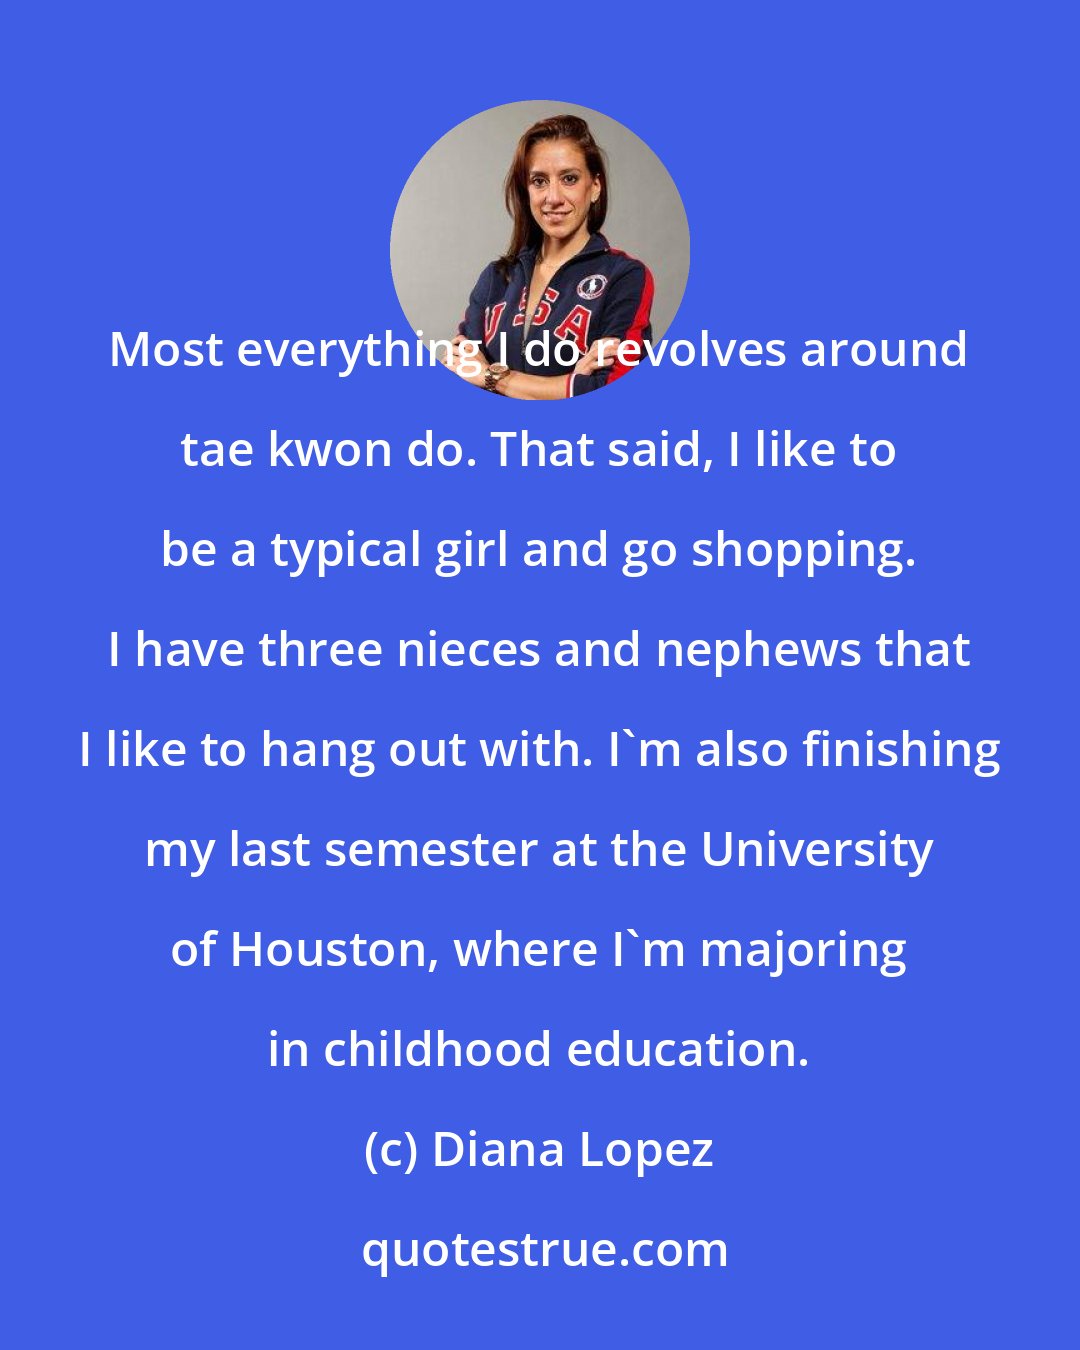 Diana Lopez: Most everything I do revolves around tae kwon do. That said, I like to be a typical girl and go shopping. I have three nieces and nephews that I like to hang out with. I'm also finishing my last semester at the University of Houston, where I'm majoring in childhood education.